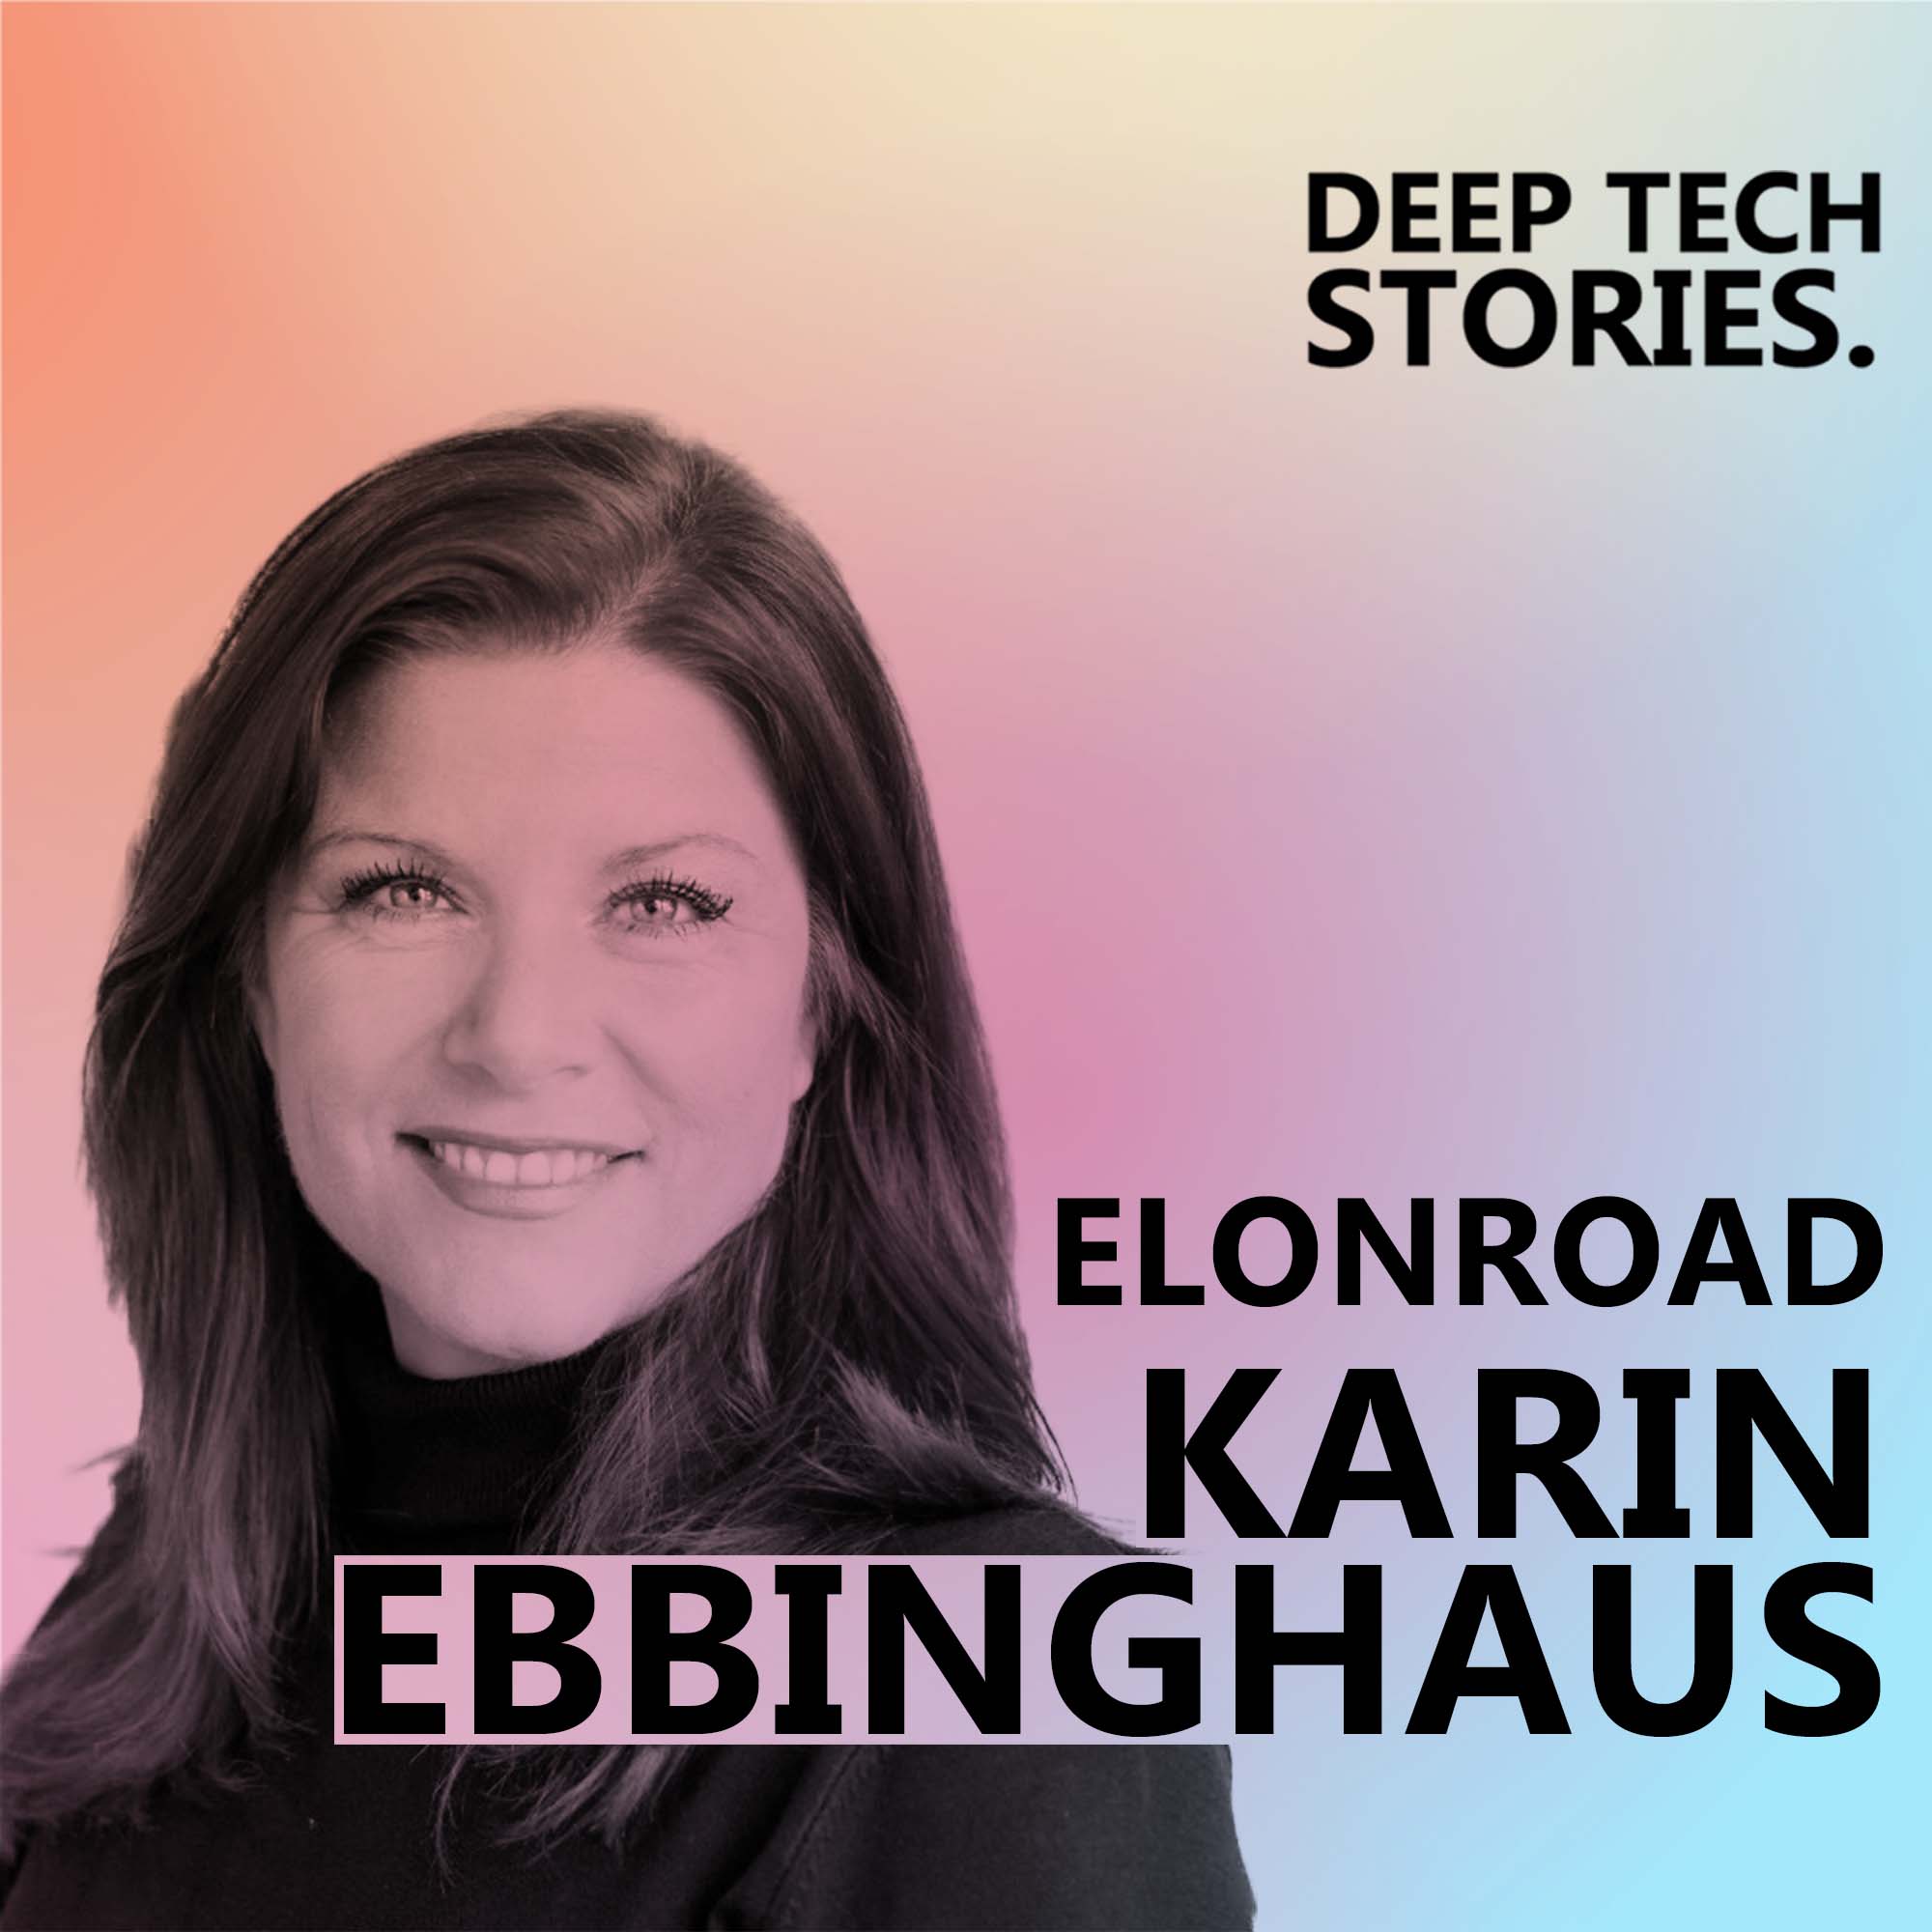 Karin Ebbinghaus on how she changed careers to become a Deep Tech CEO Image